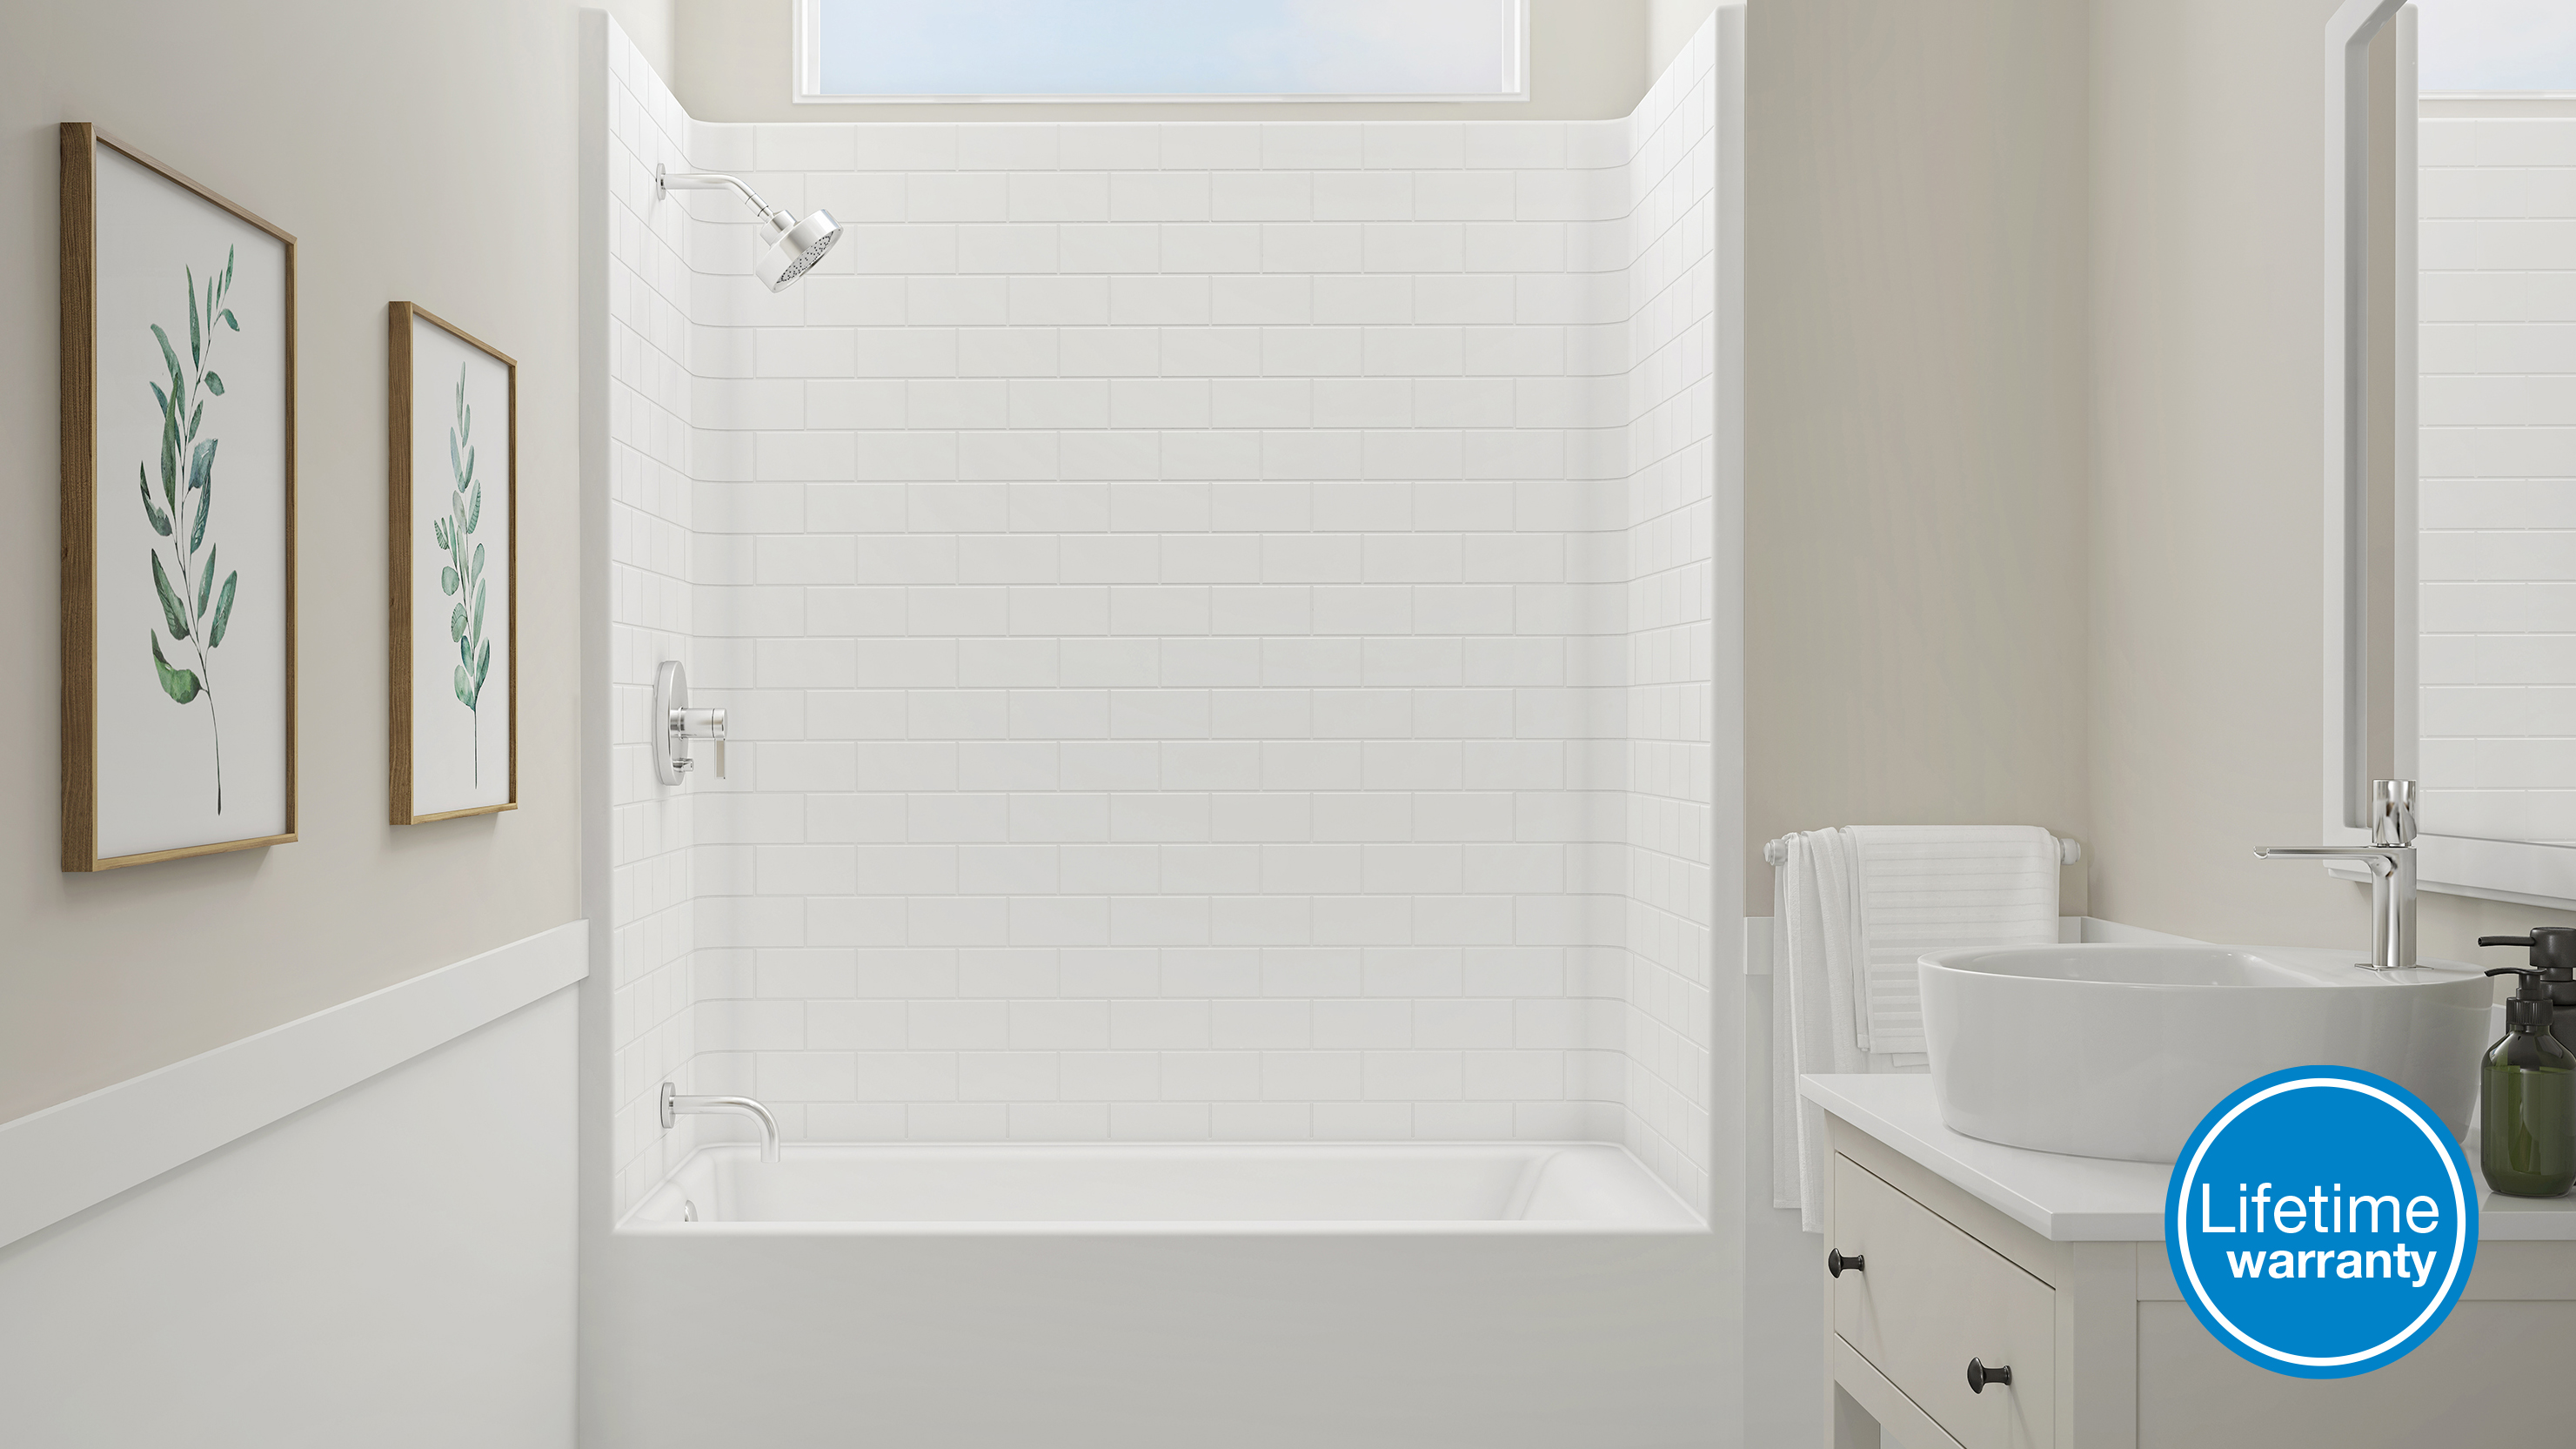 Image of a bathroom with a tub shower in Clarion's subway tile.